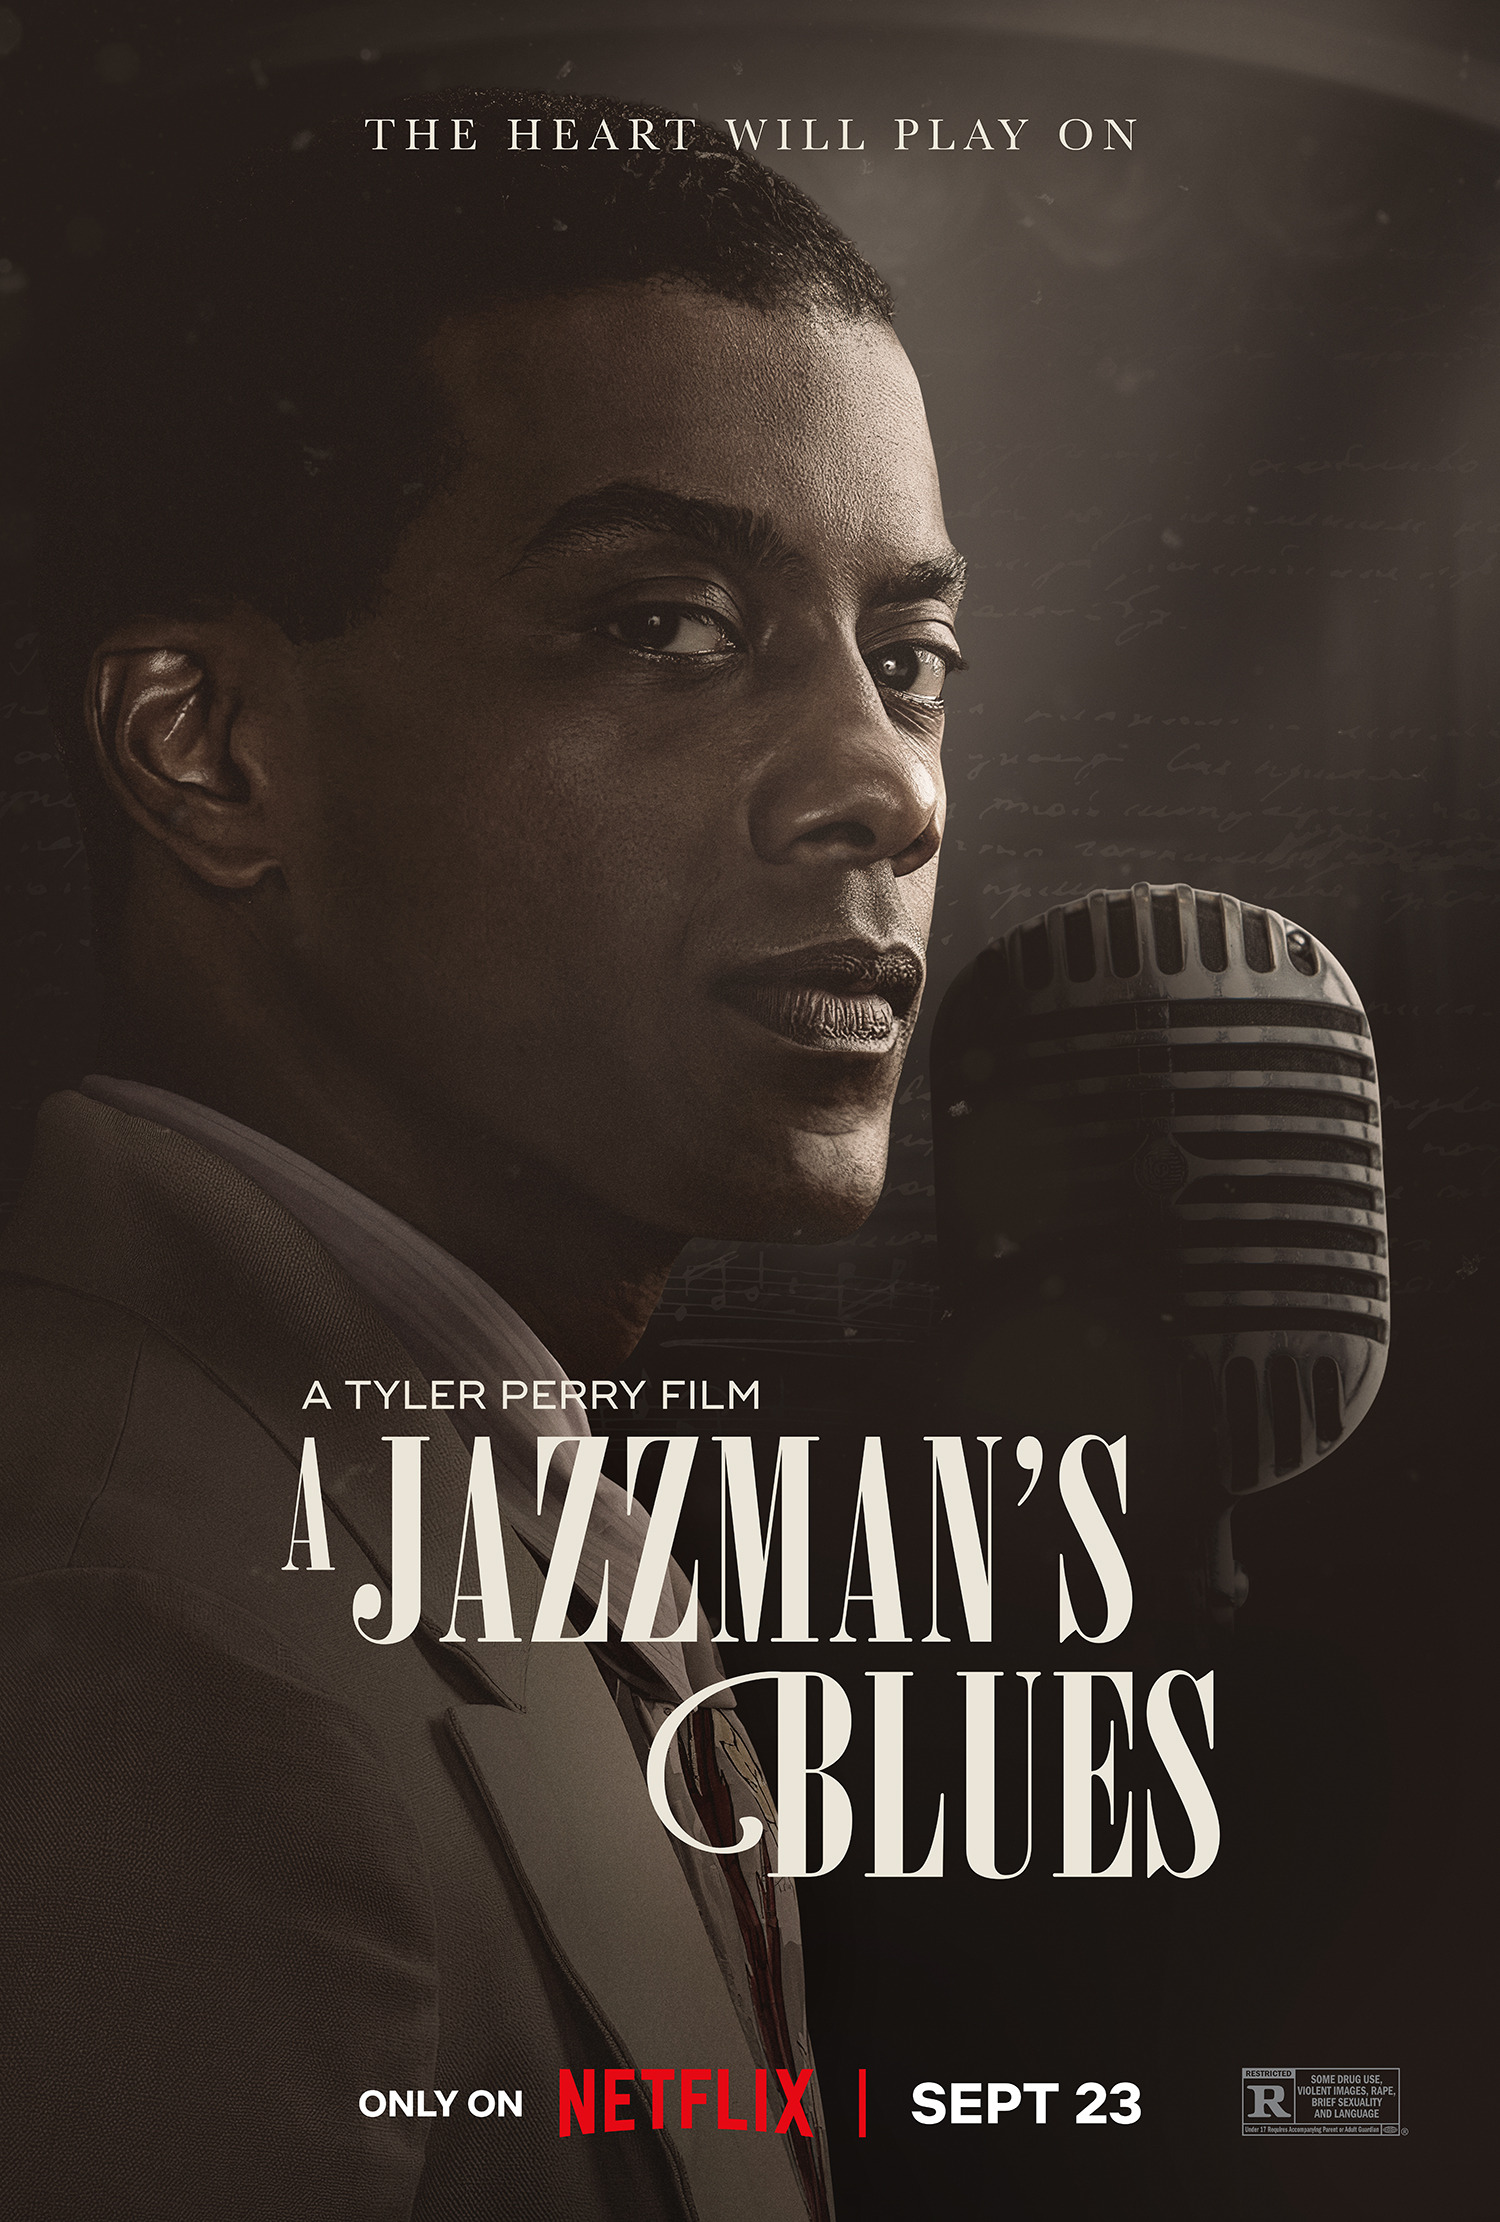 Mega Sized Movie Poster Image for A Jazzman's Blues (#5 of 7)